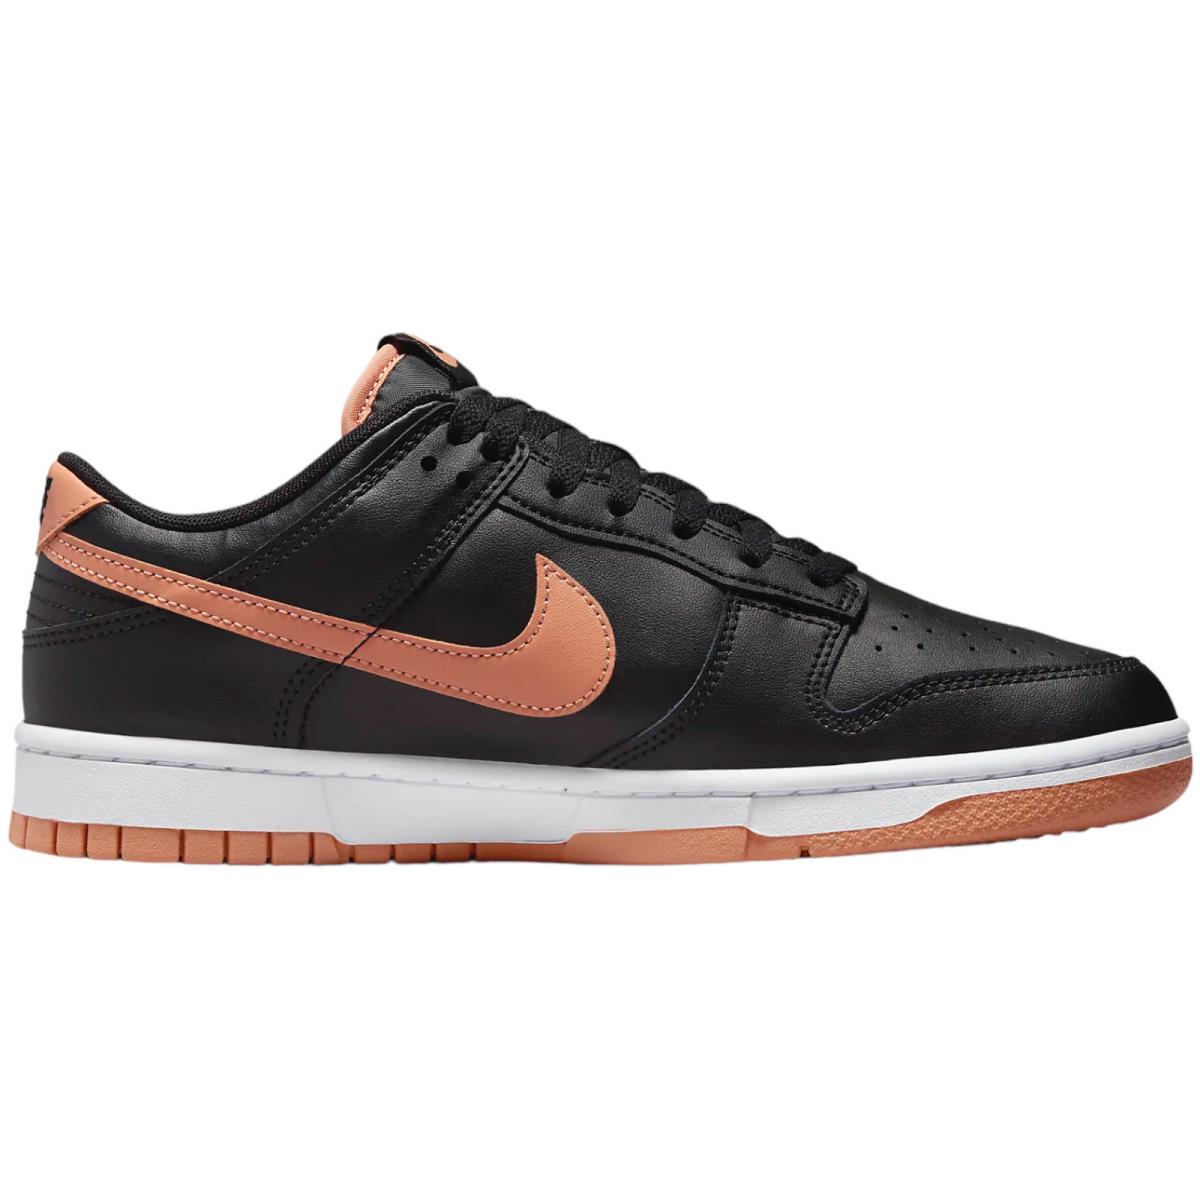 Nike Dunk Low Retro Men`s Casual Shoes All Colors US Sizes 7-14 Black/Black/White/Amber Brown